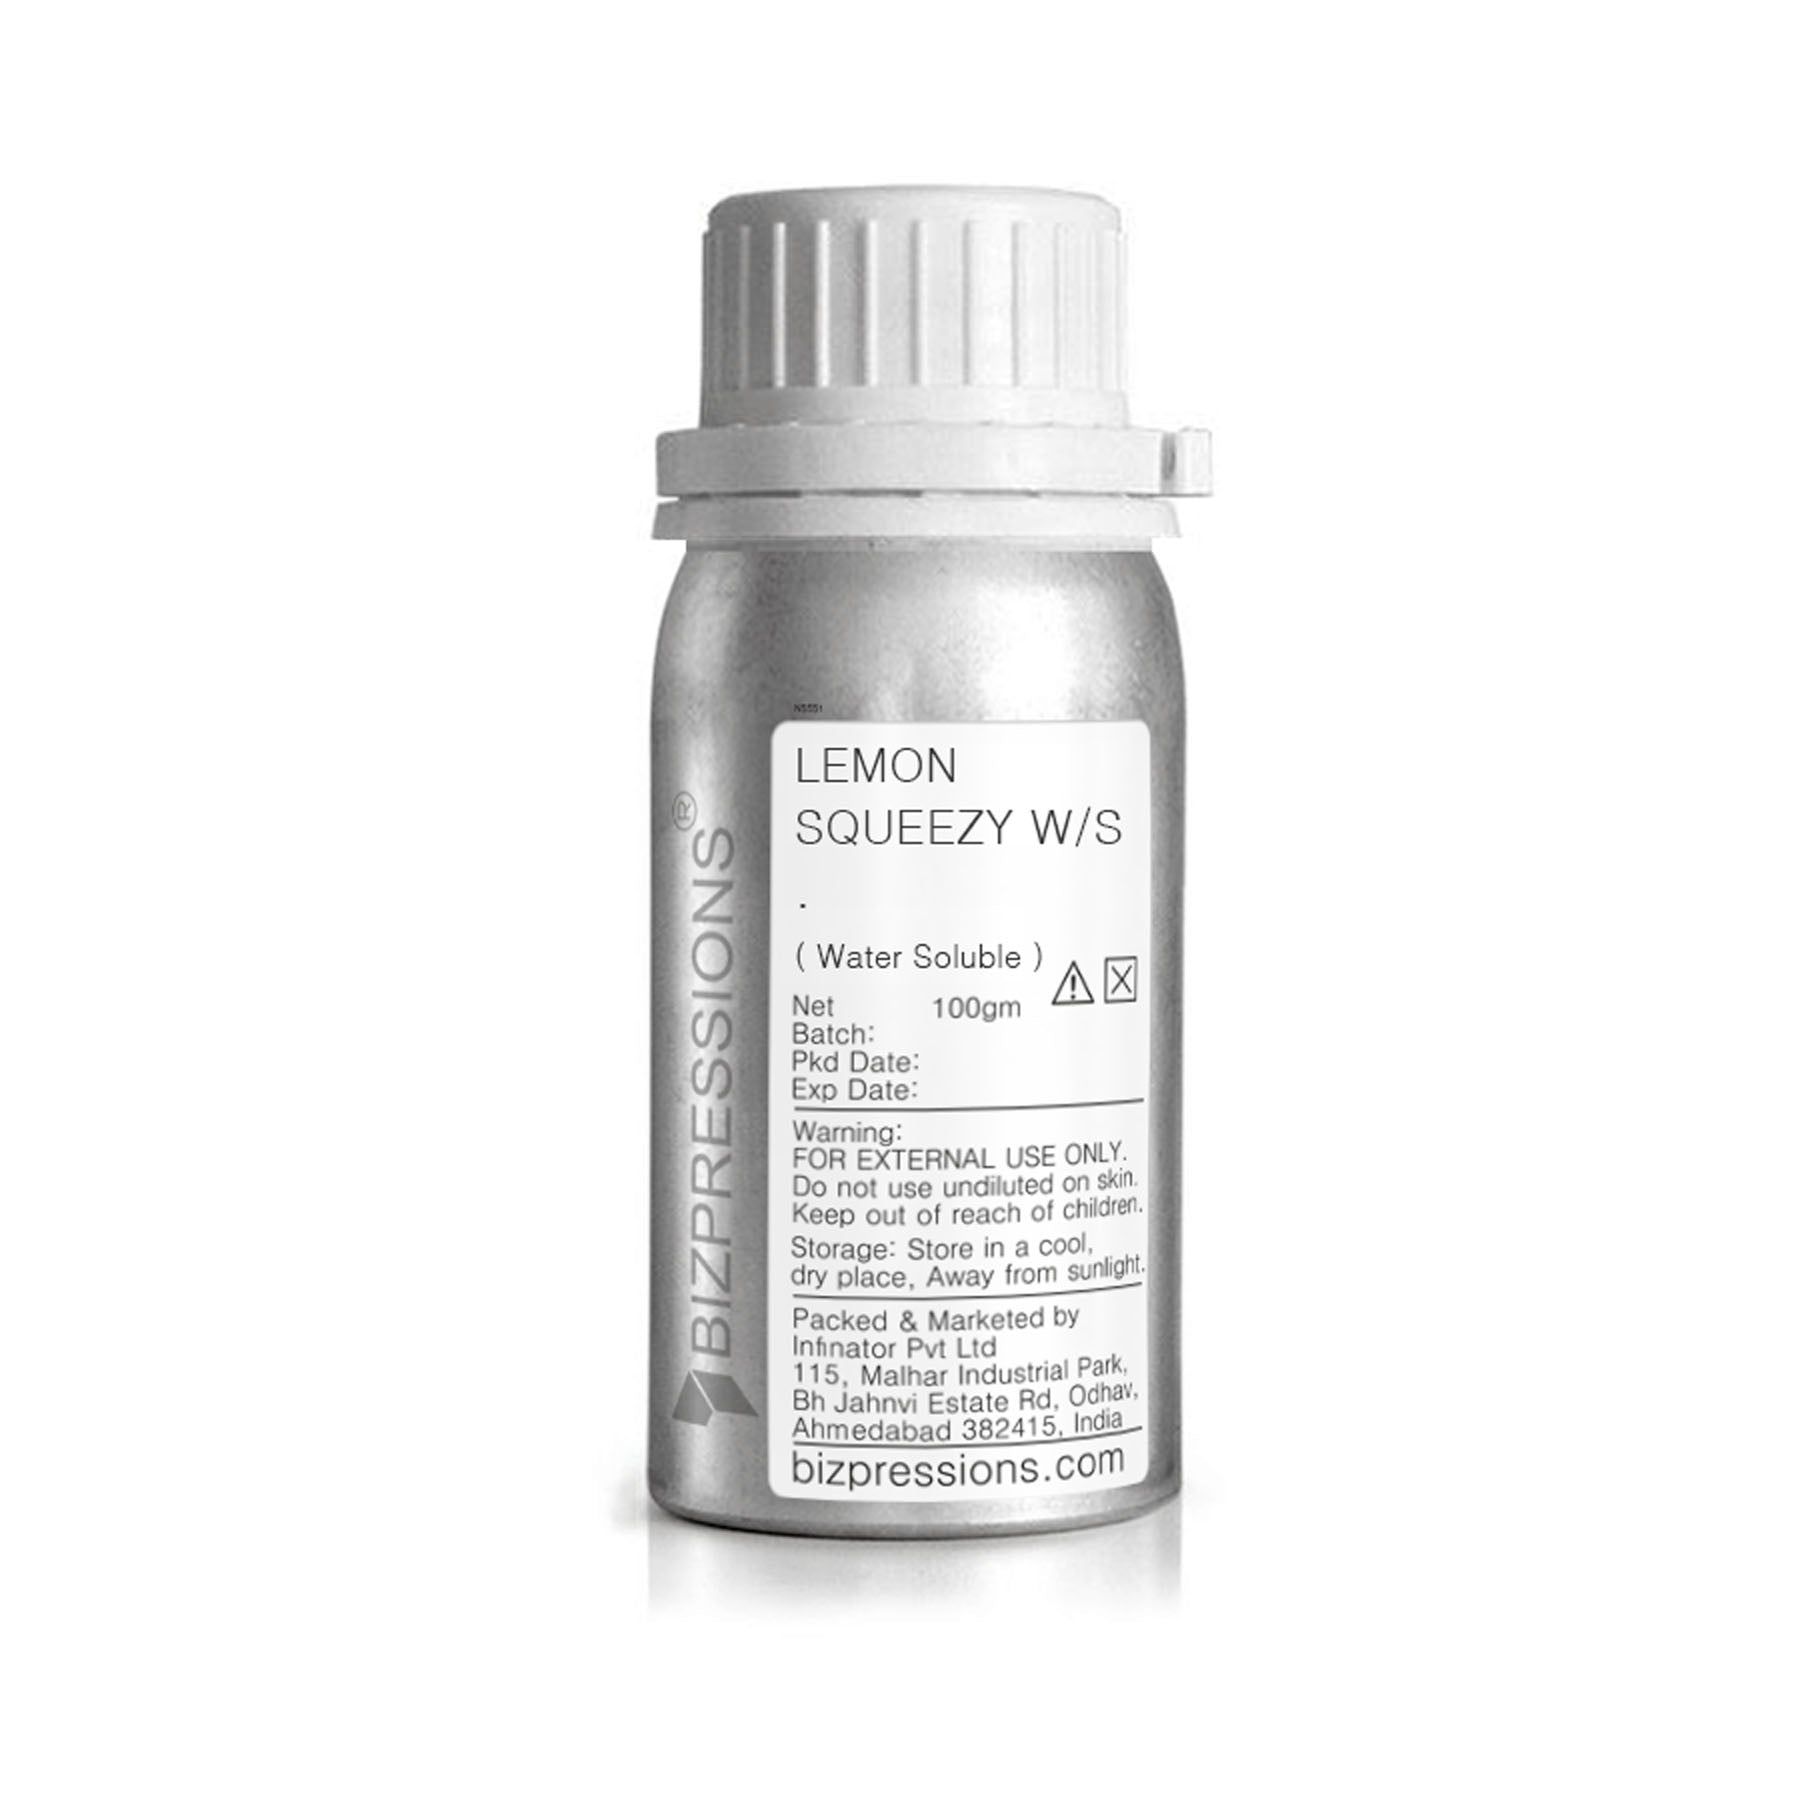 LEMON SQUEEZY W/S - Fragrance ( Water Soluble ) - 100 gm